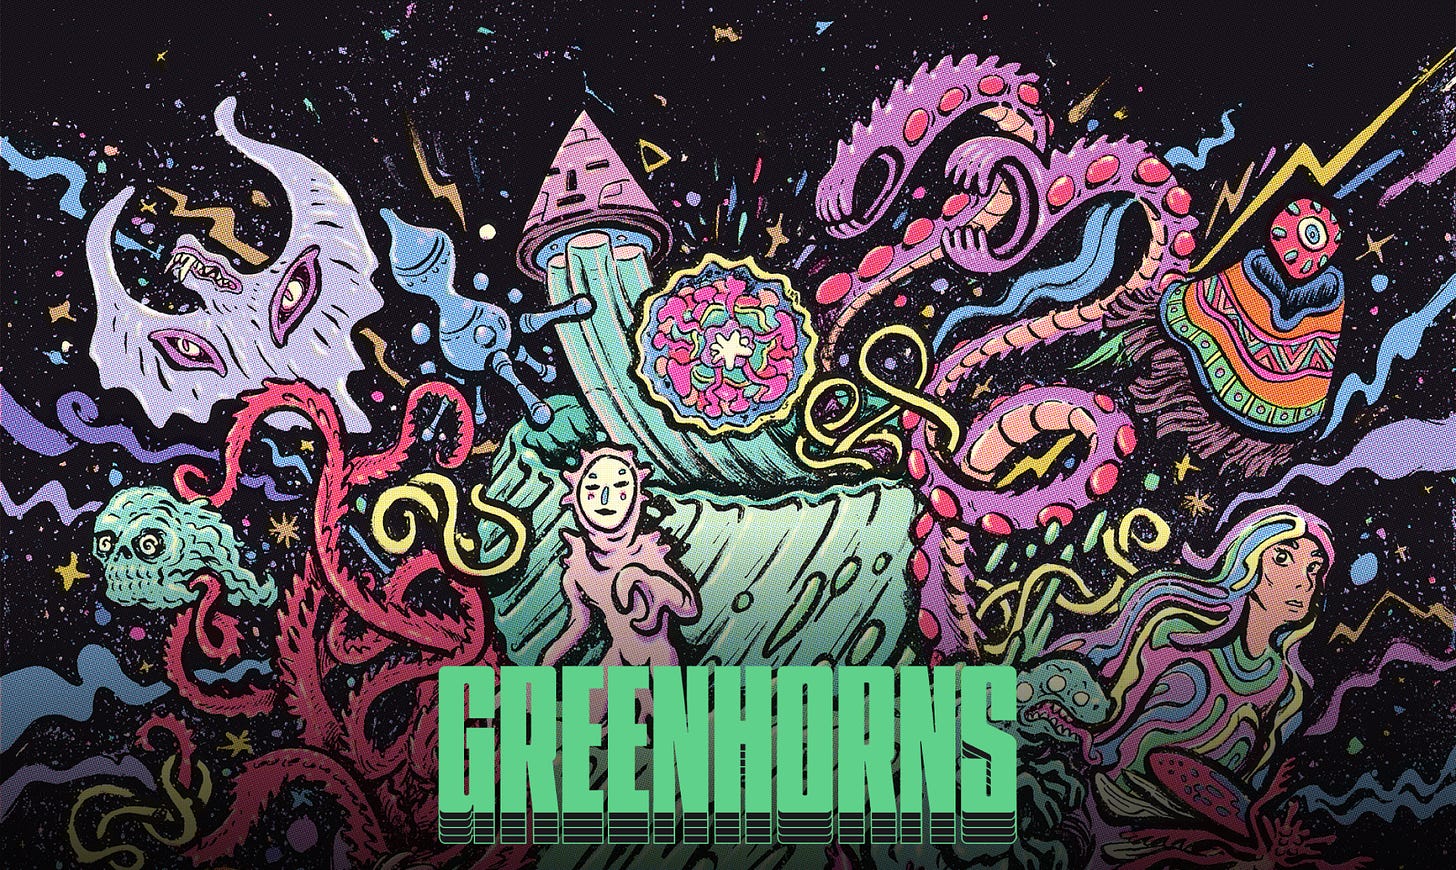 Greenhorns. Psychedelic space art. Aliens encircle a half-built planet open like an egg.